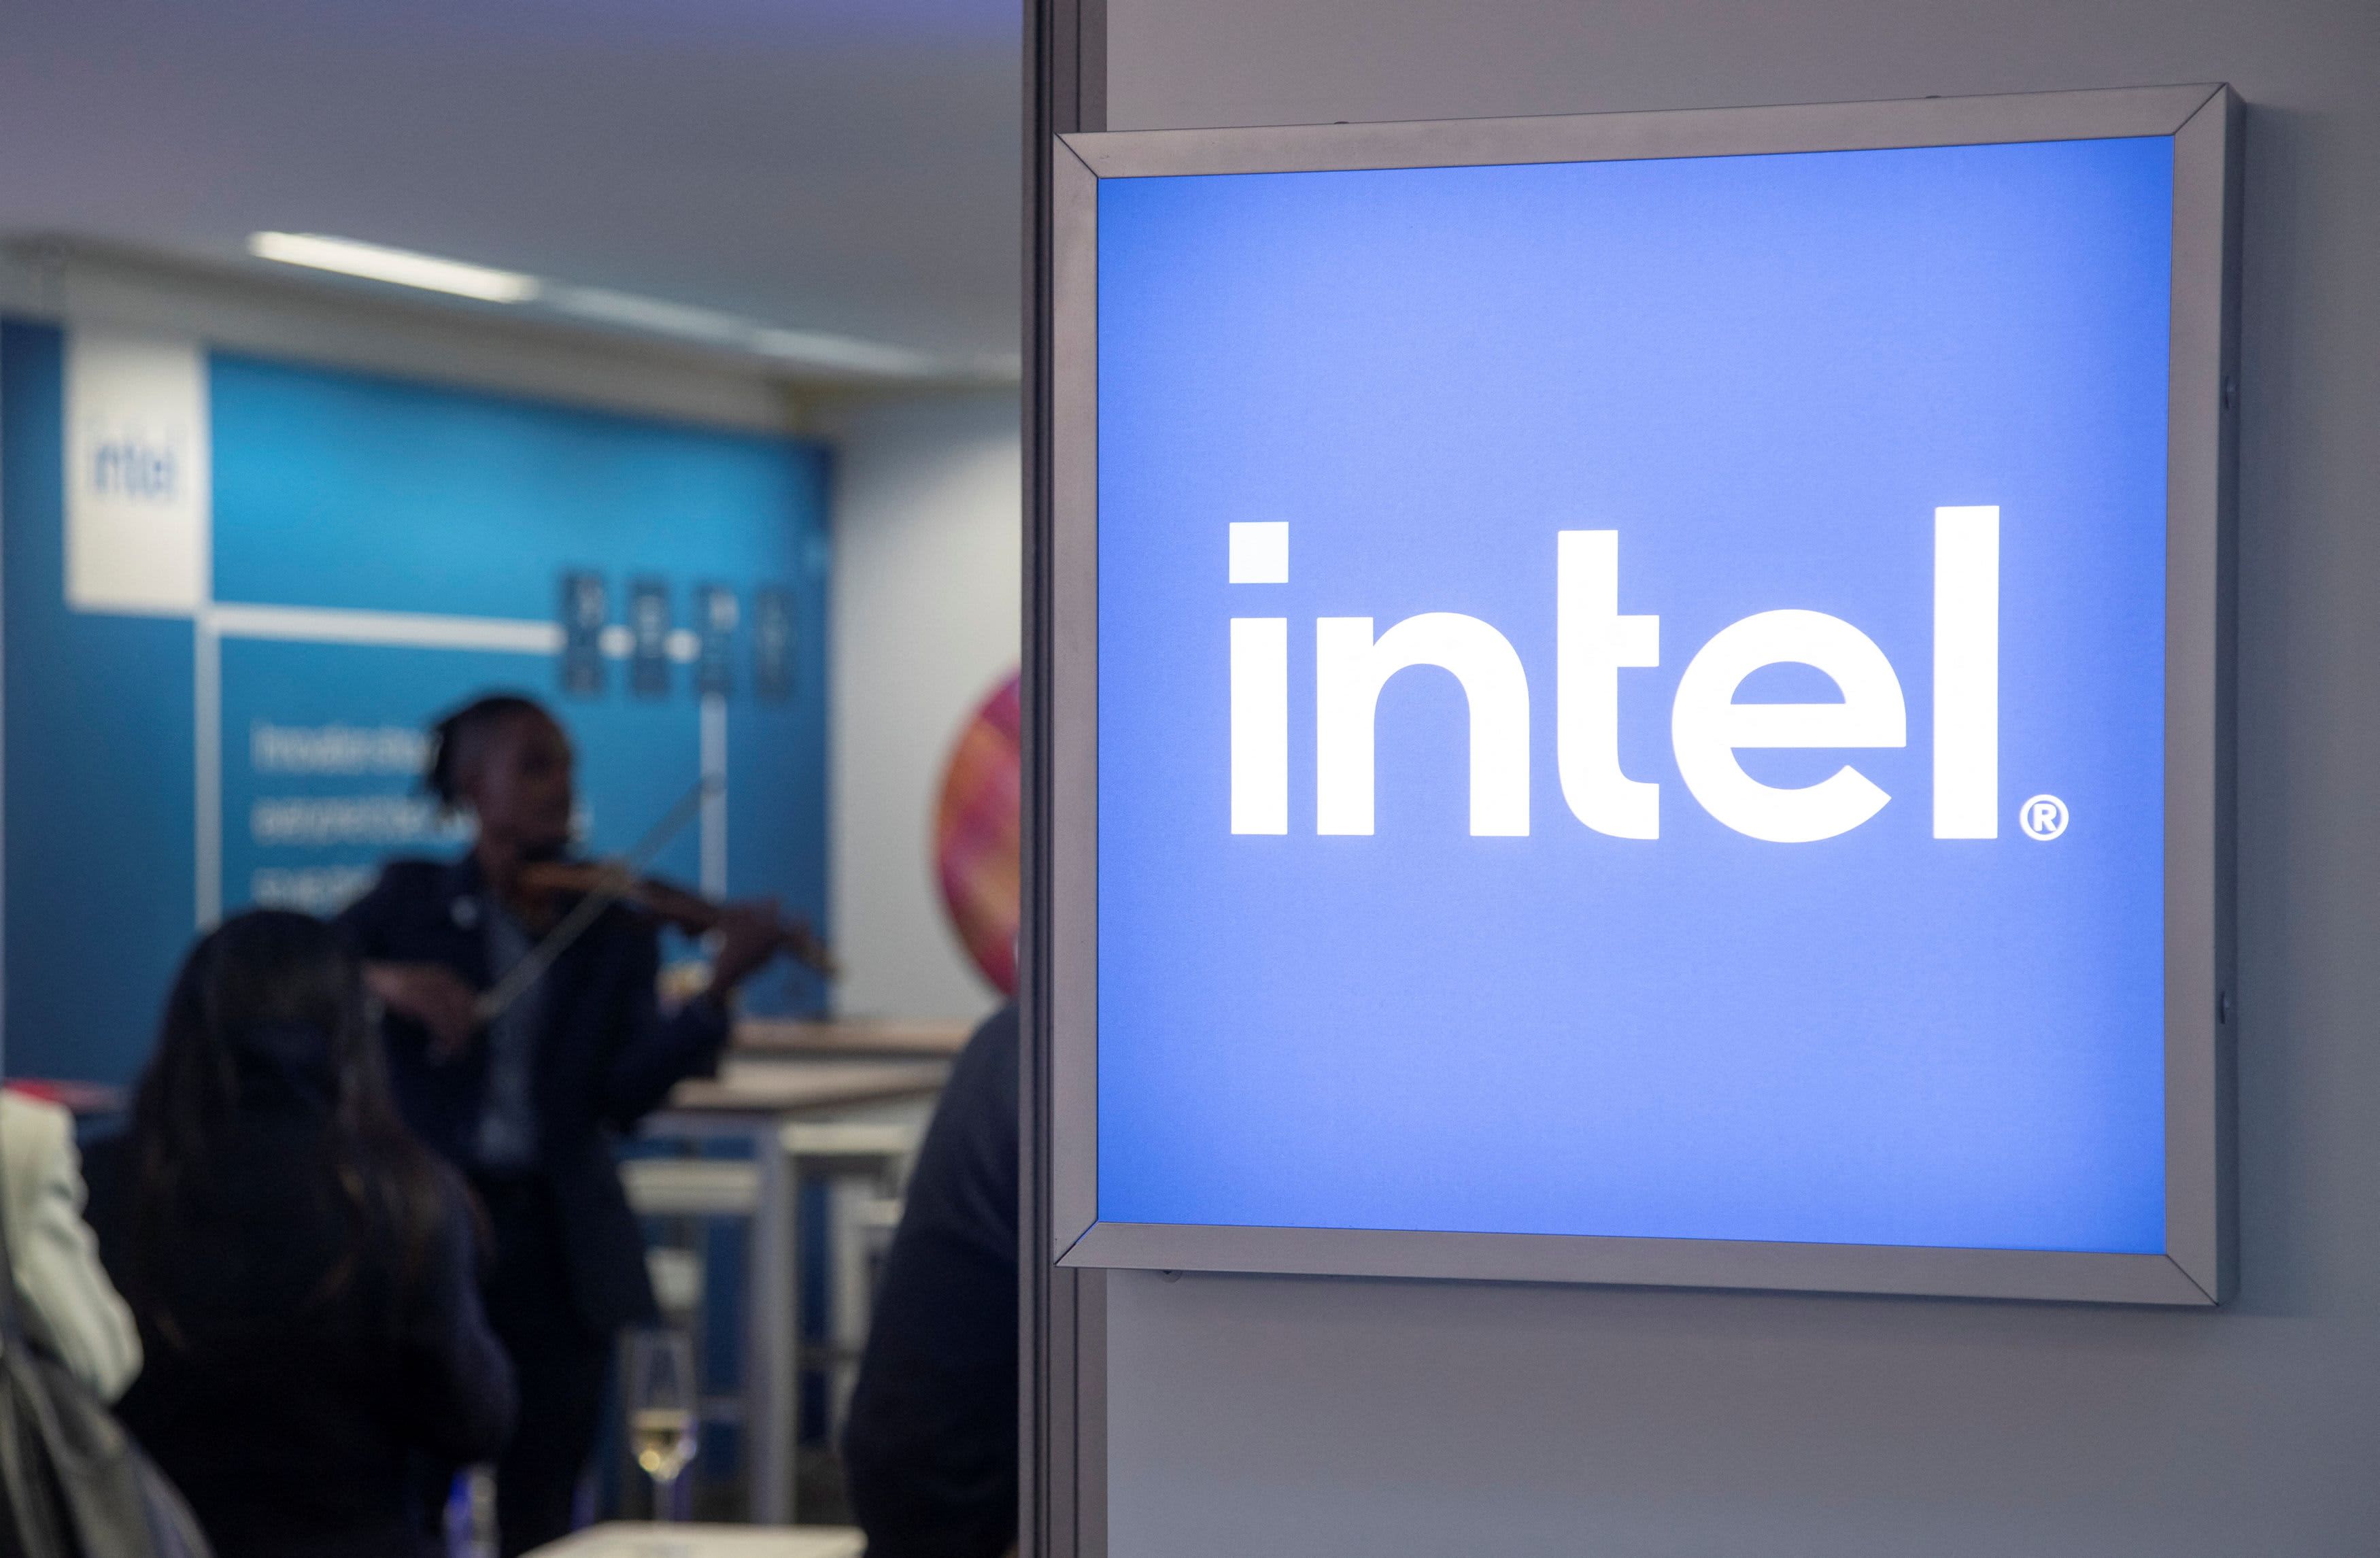 Bernstein analyst on Intel earnings: 'I don't think I've ever seen anything quite like this before'